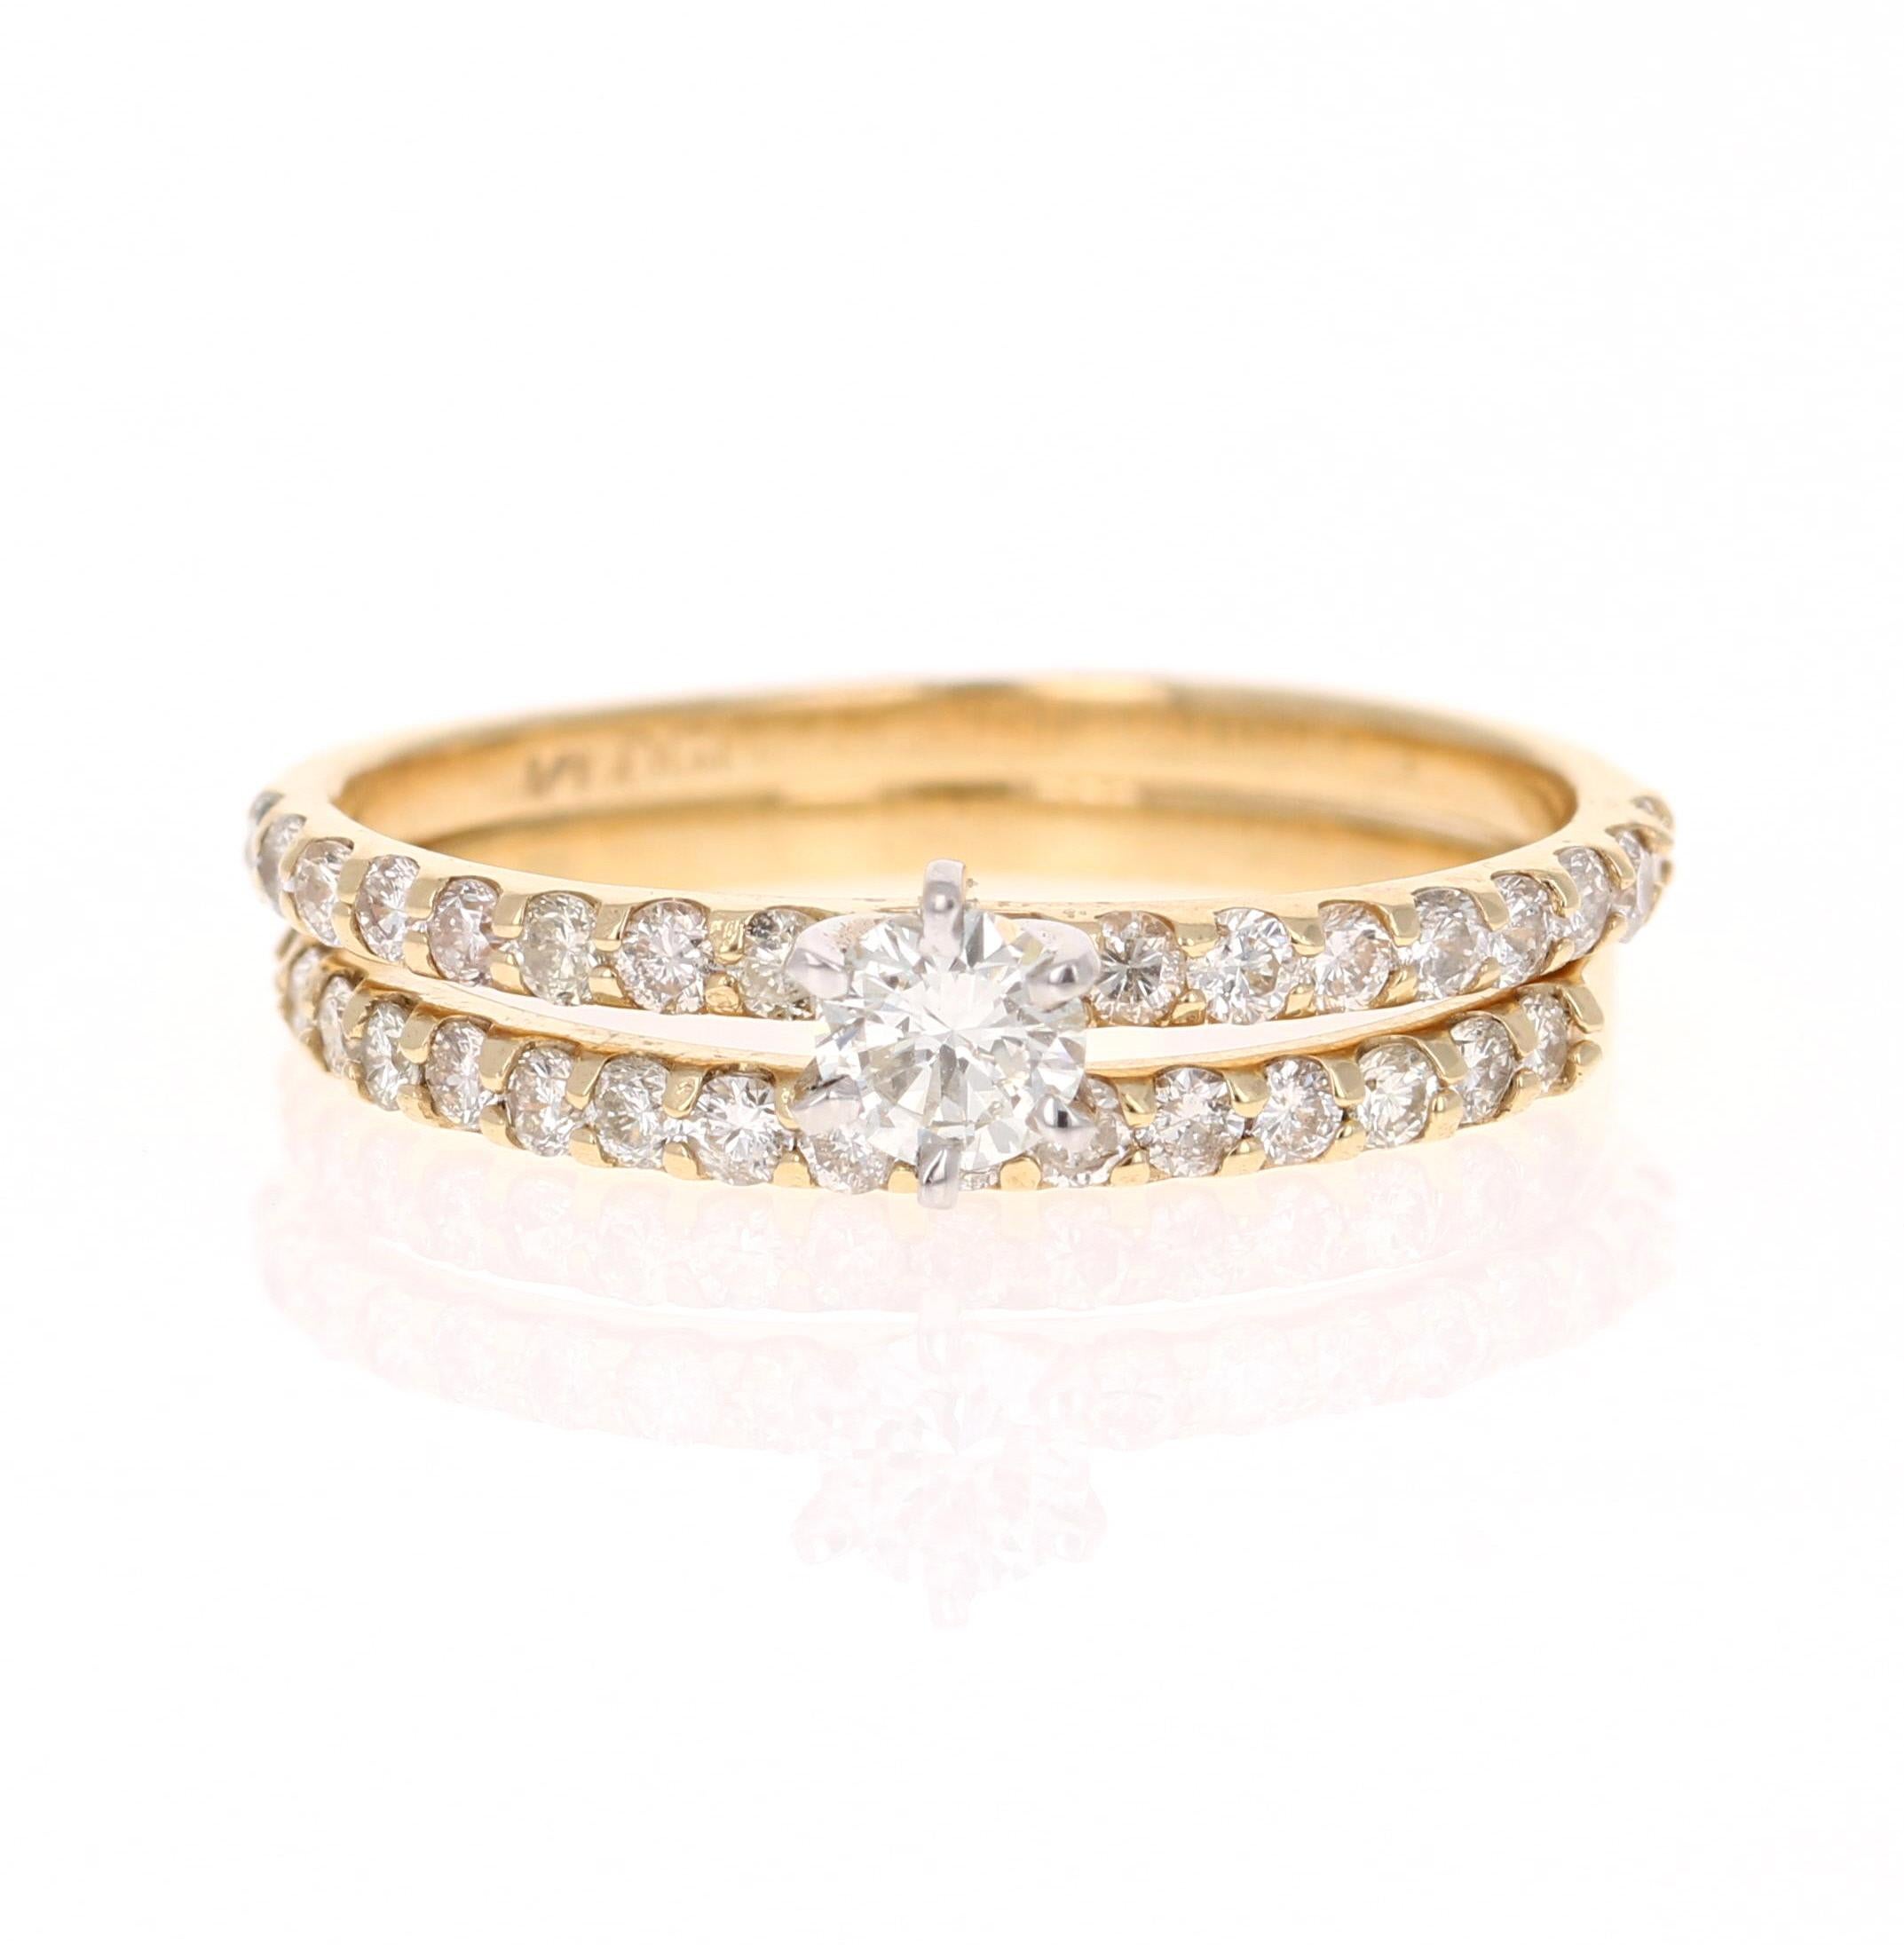 Beautiful Wedding Set in 14 Karat Yellow Gold

The center round cut diamond weighs 0.22 Carats (Clarity: SI3-, Color: H) and is surrounded by 34 round cut diamonds on the shank and on the band that weigh 0.64 Carats (Clarity: SI2, Color: H) The